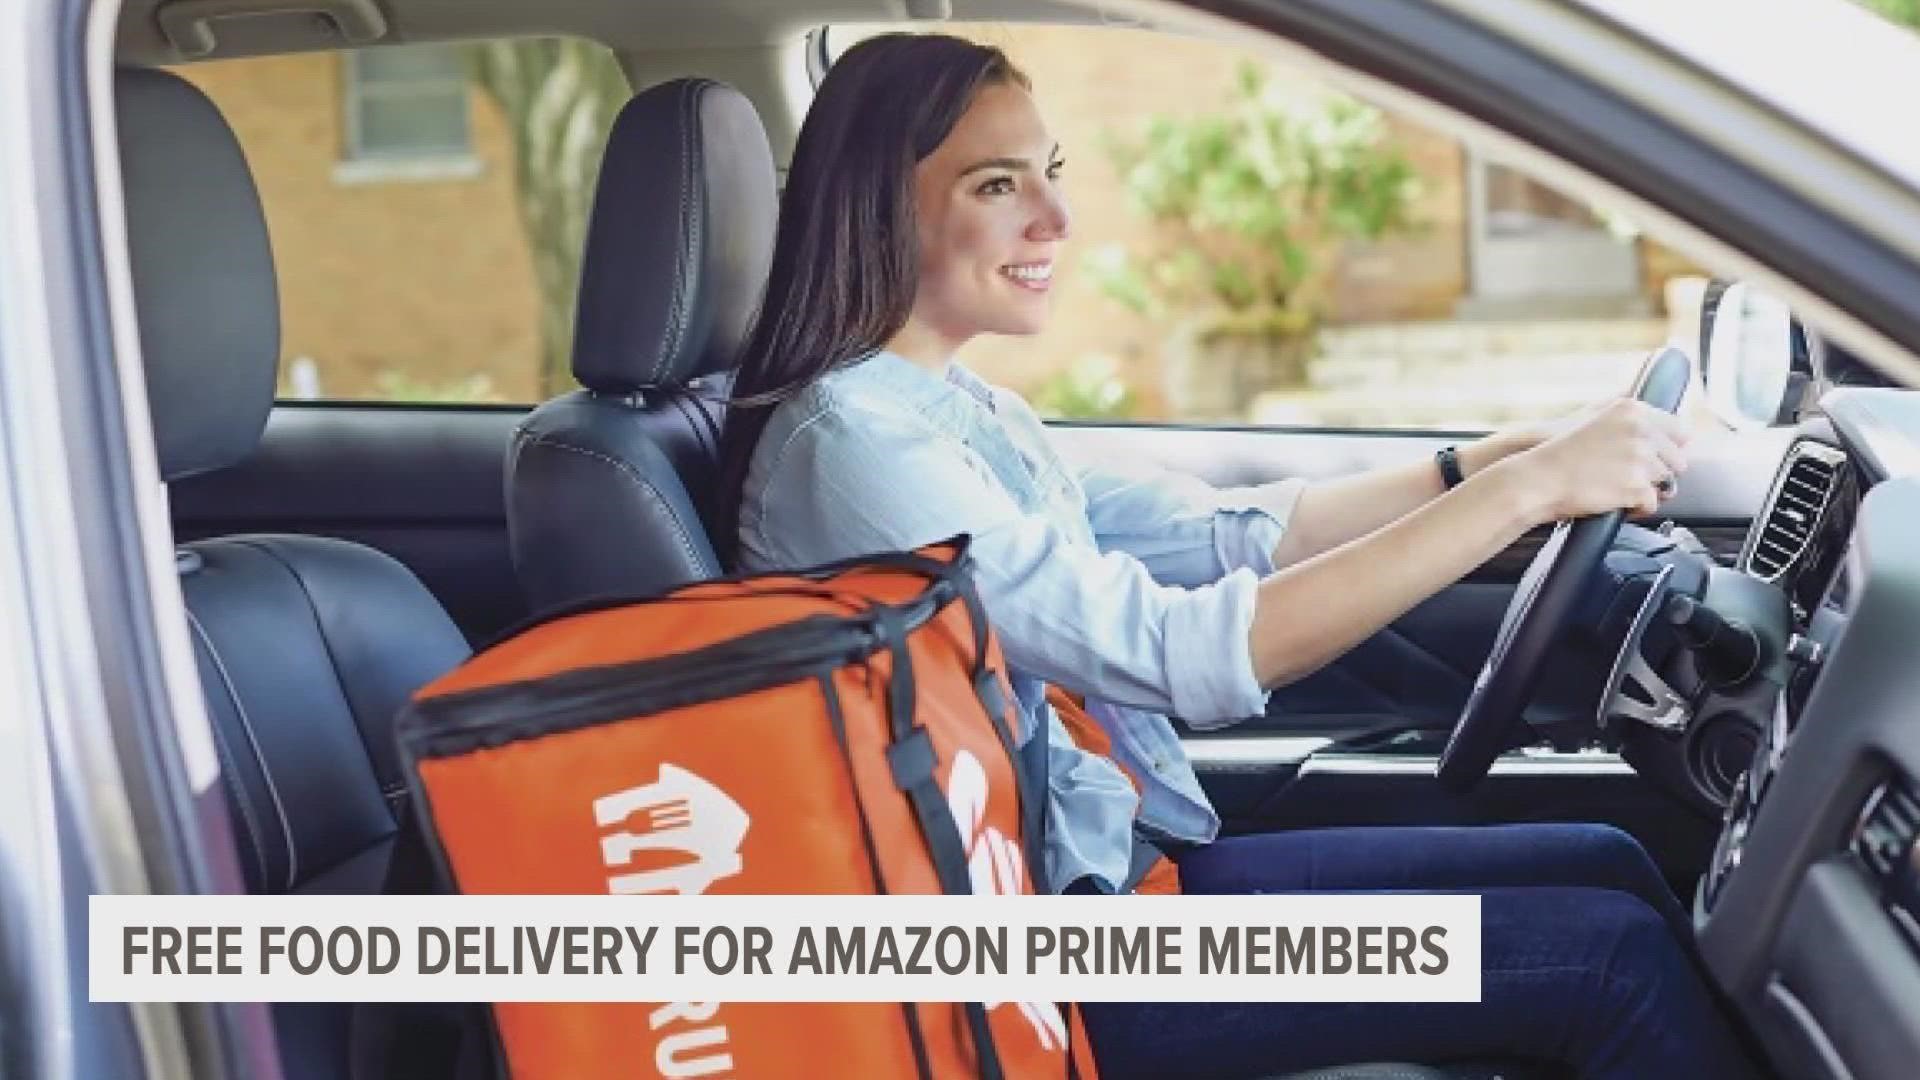 Amazon said Prime members can now get a free one-year Grubhub+ membership. The membership usually costs $9.99 a month and gives users unlimited delivery.